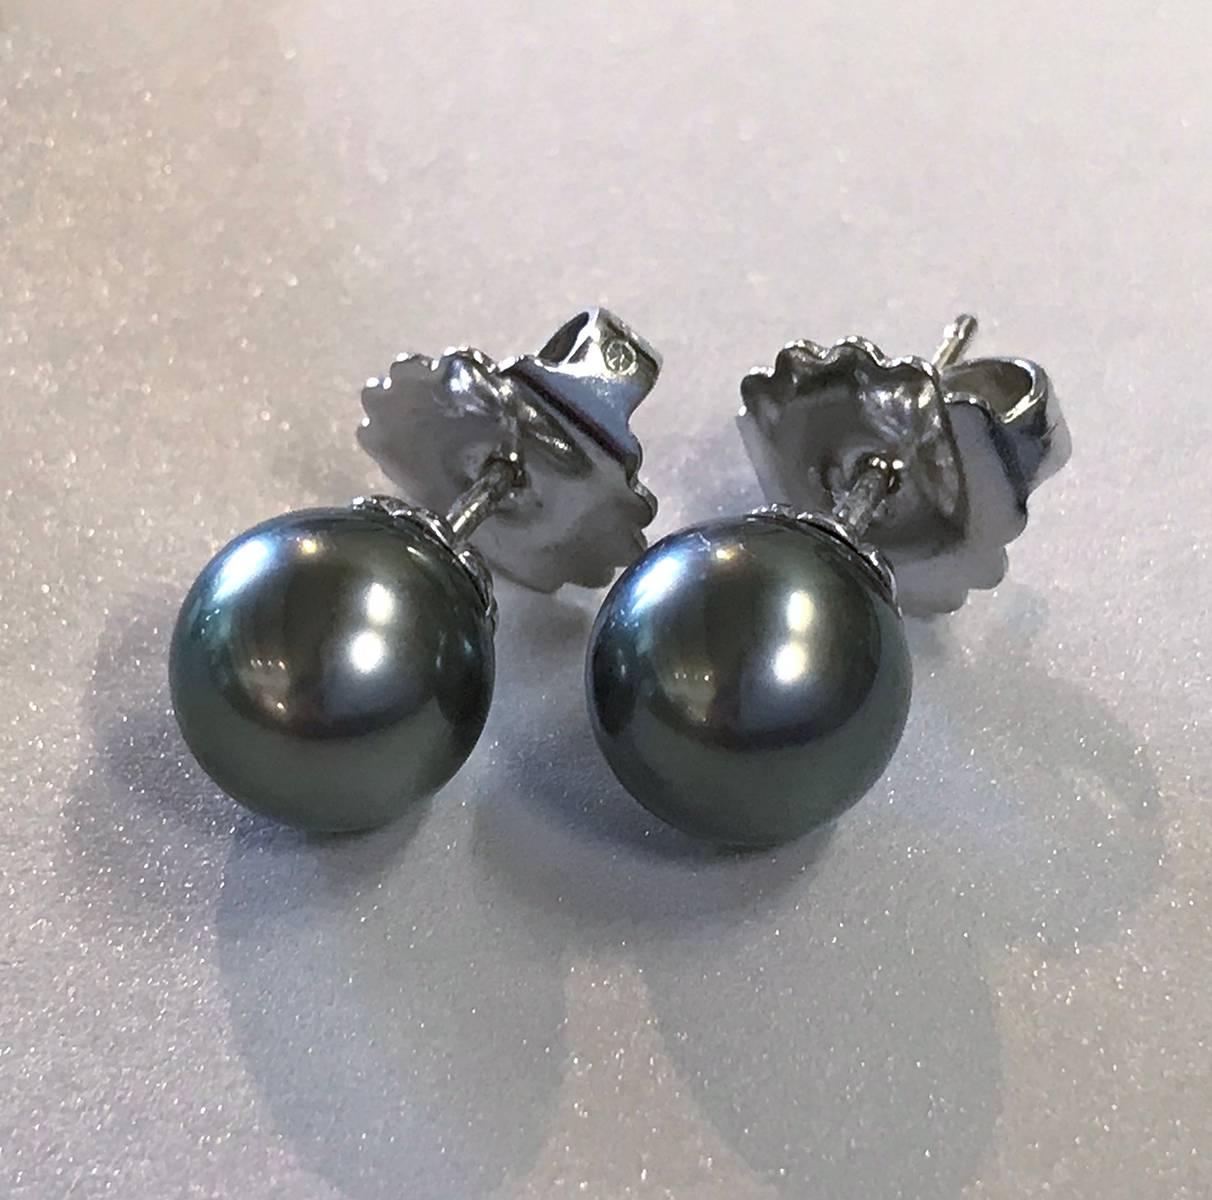 Classic 18k white gold Akoya black cultured pearl earrings. These elegant 9mm pearls will make a great addition to any woman’s jewelry box. Known for their brilliant luster and rich color, Akoya pearls are a traditional symbol of elegance and